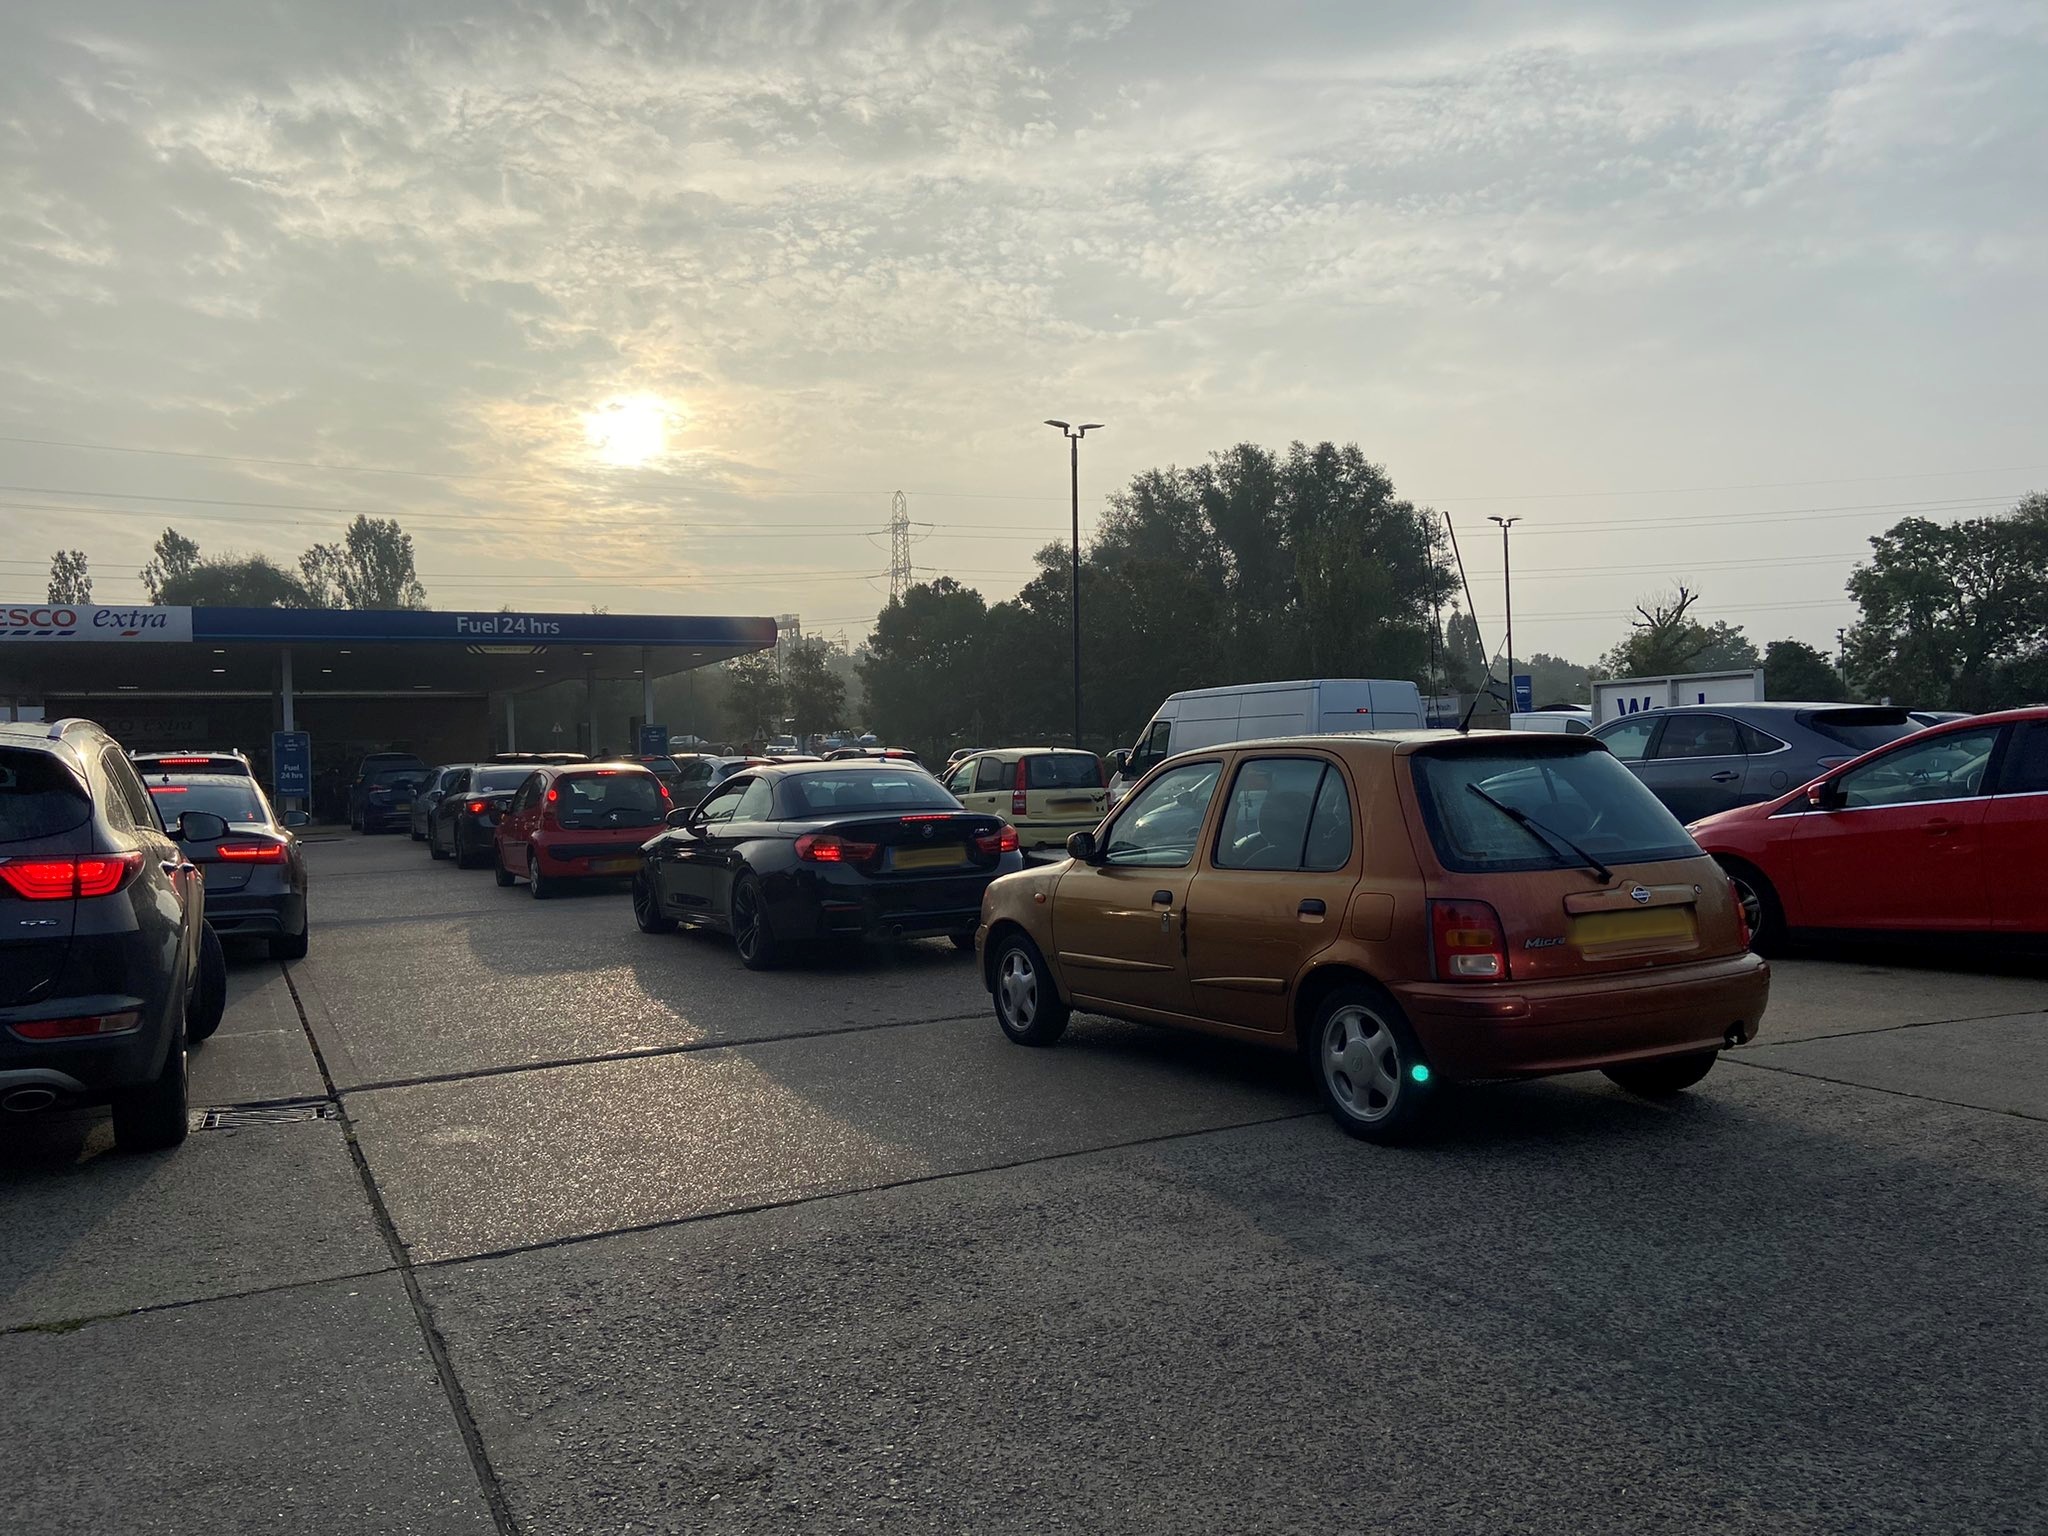 Cars queue for petrol at Tesco in Lower HIgh Street, Watford